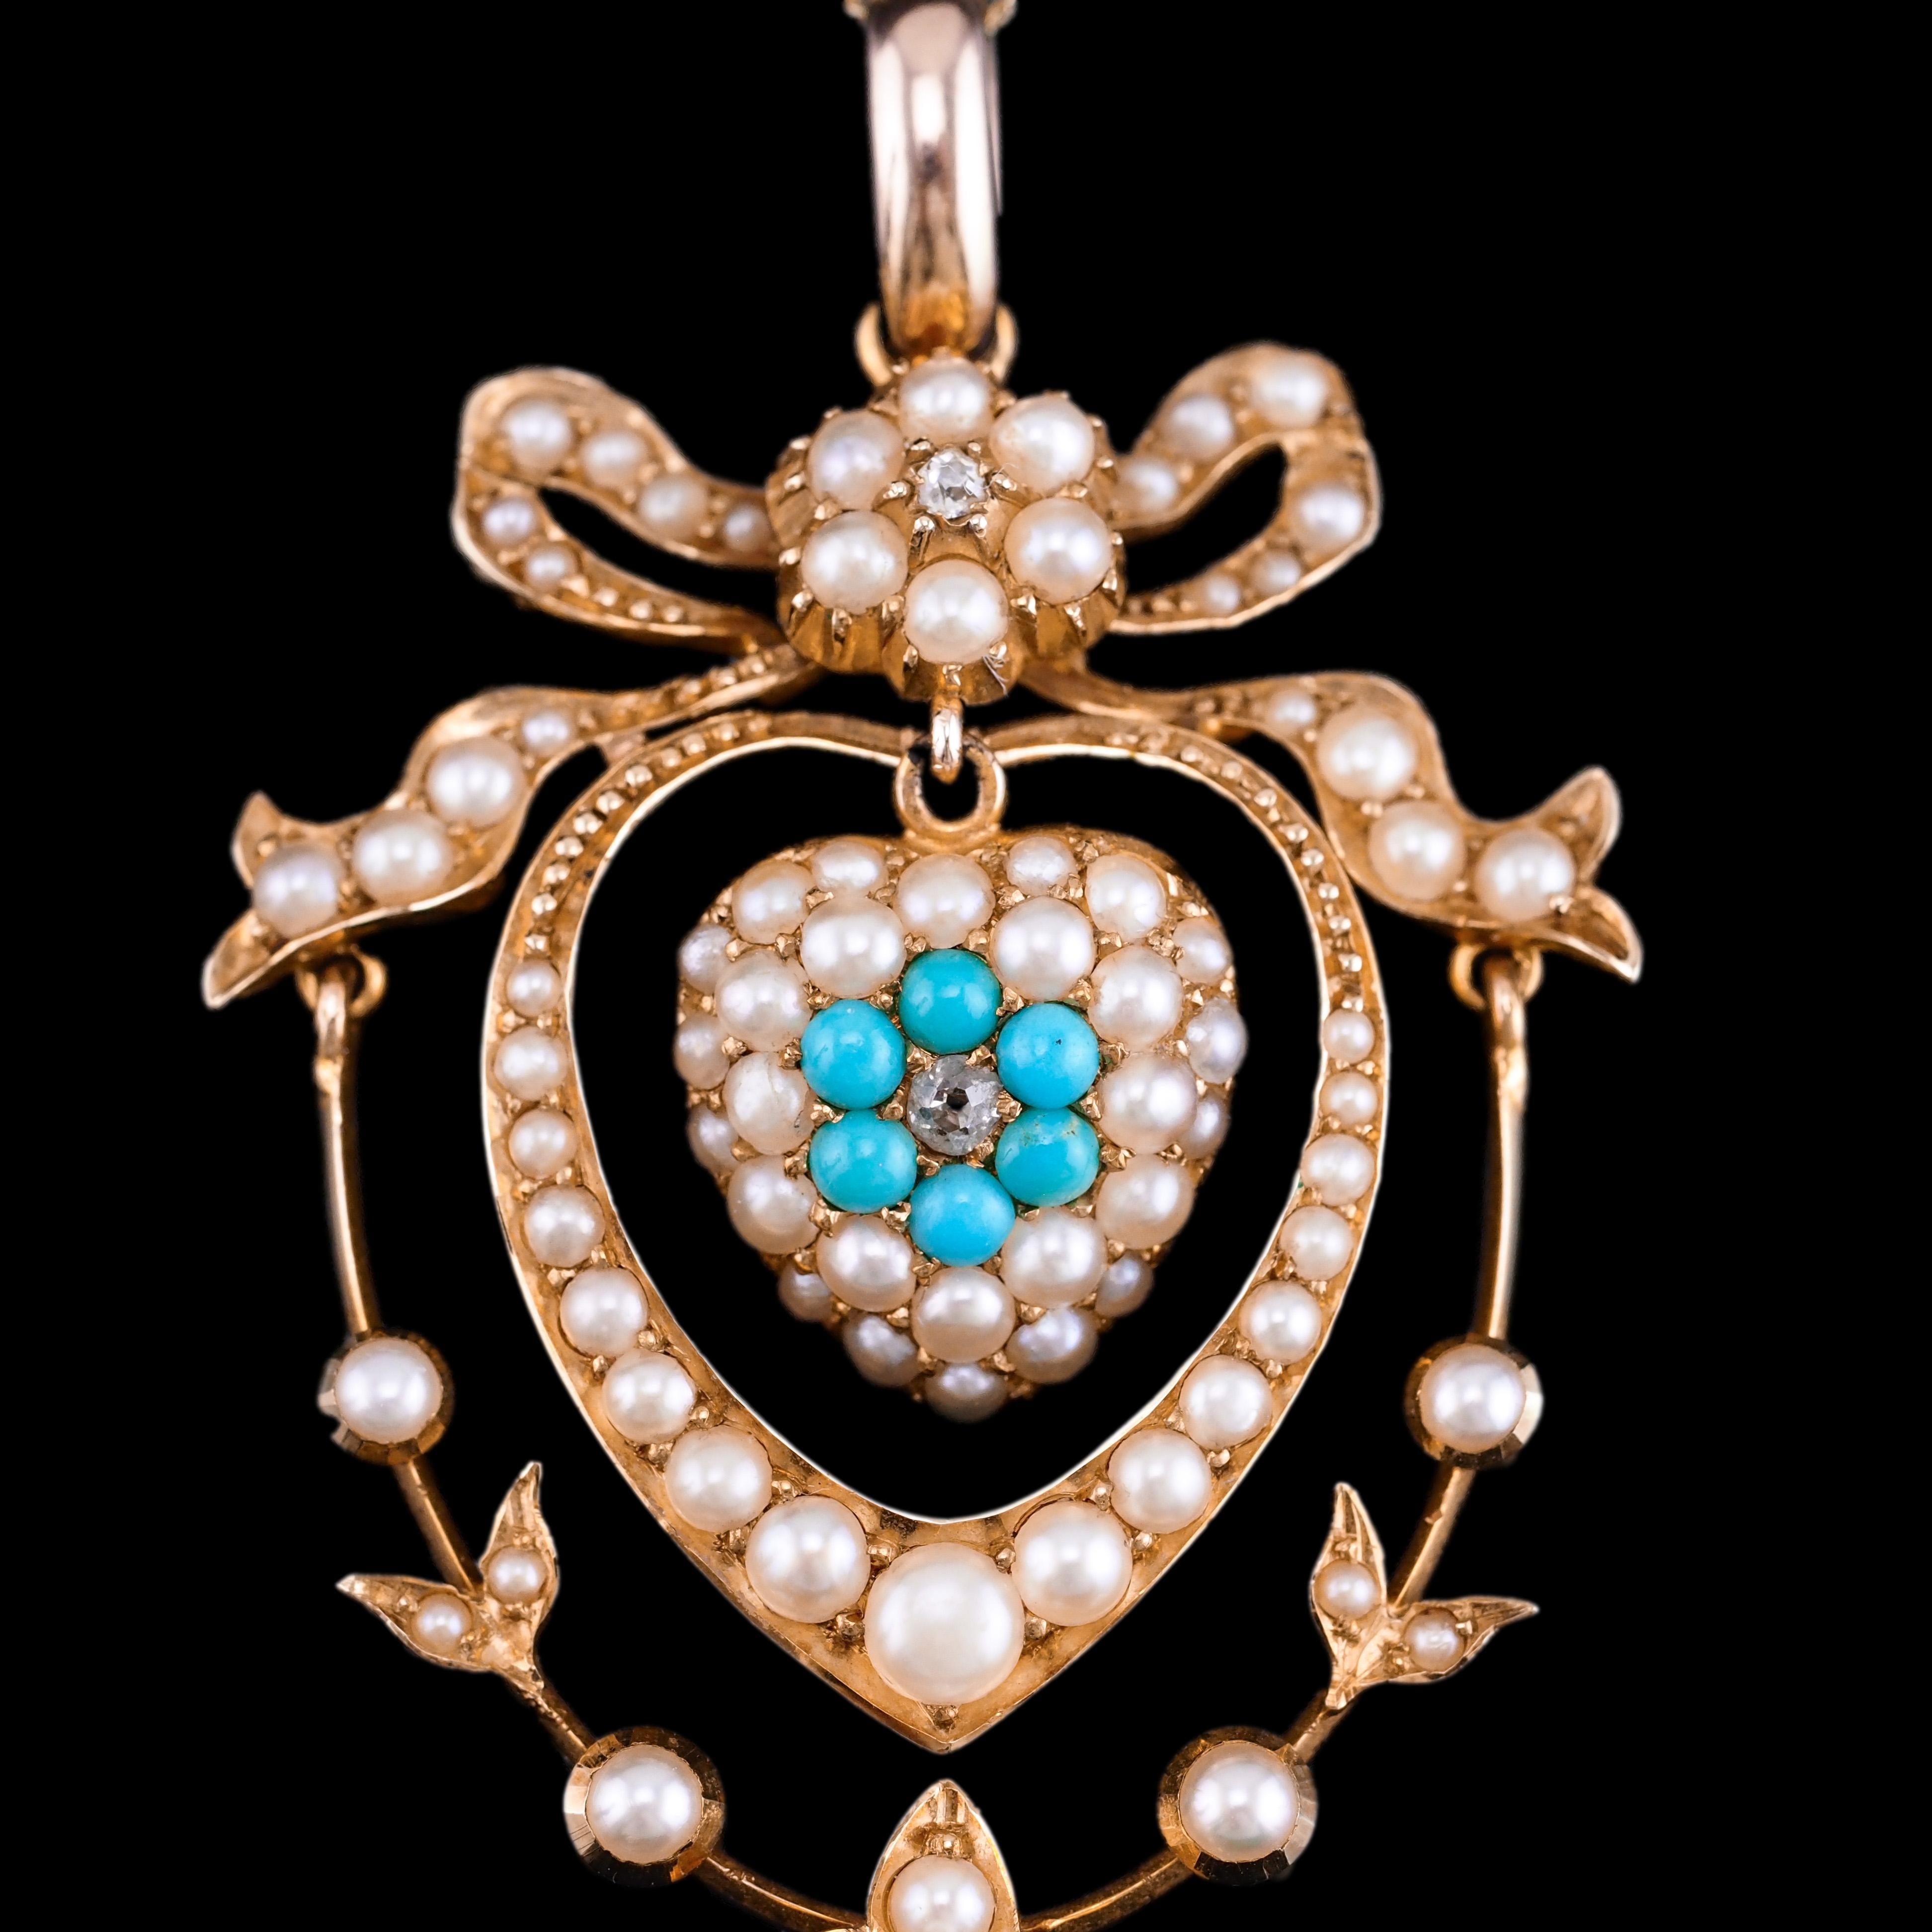 Antique Edwardian 15K Gold Turquoise Diamond & Seed Pearl Pendant Necklace c1910 For Sale 10